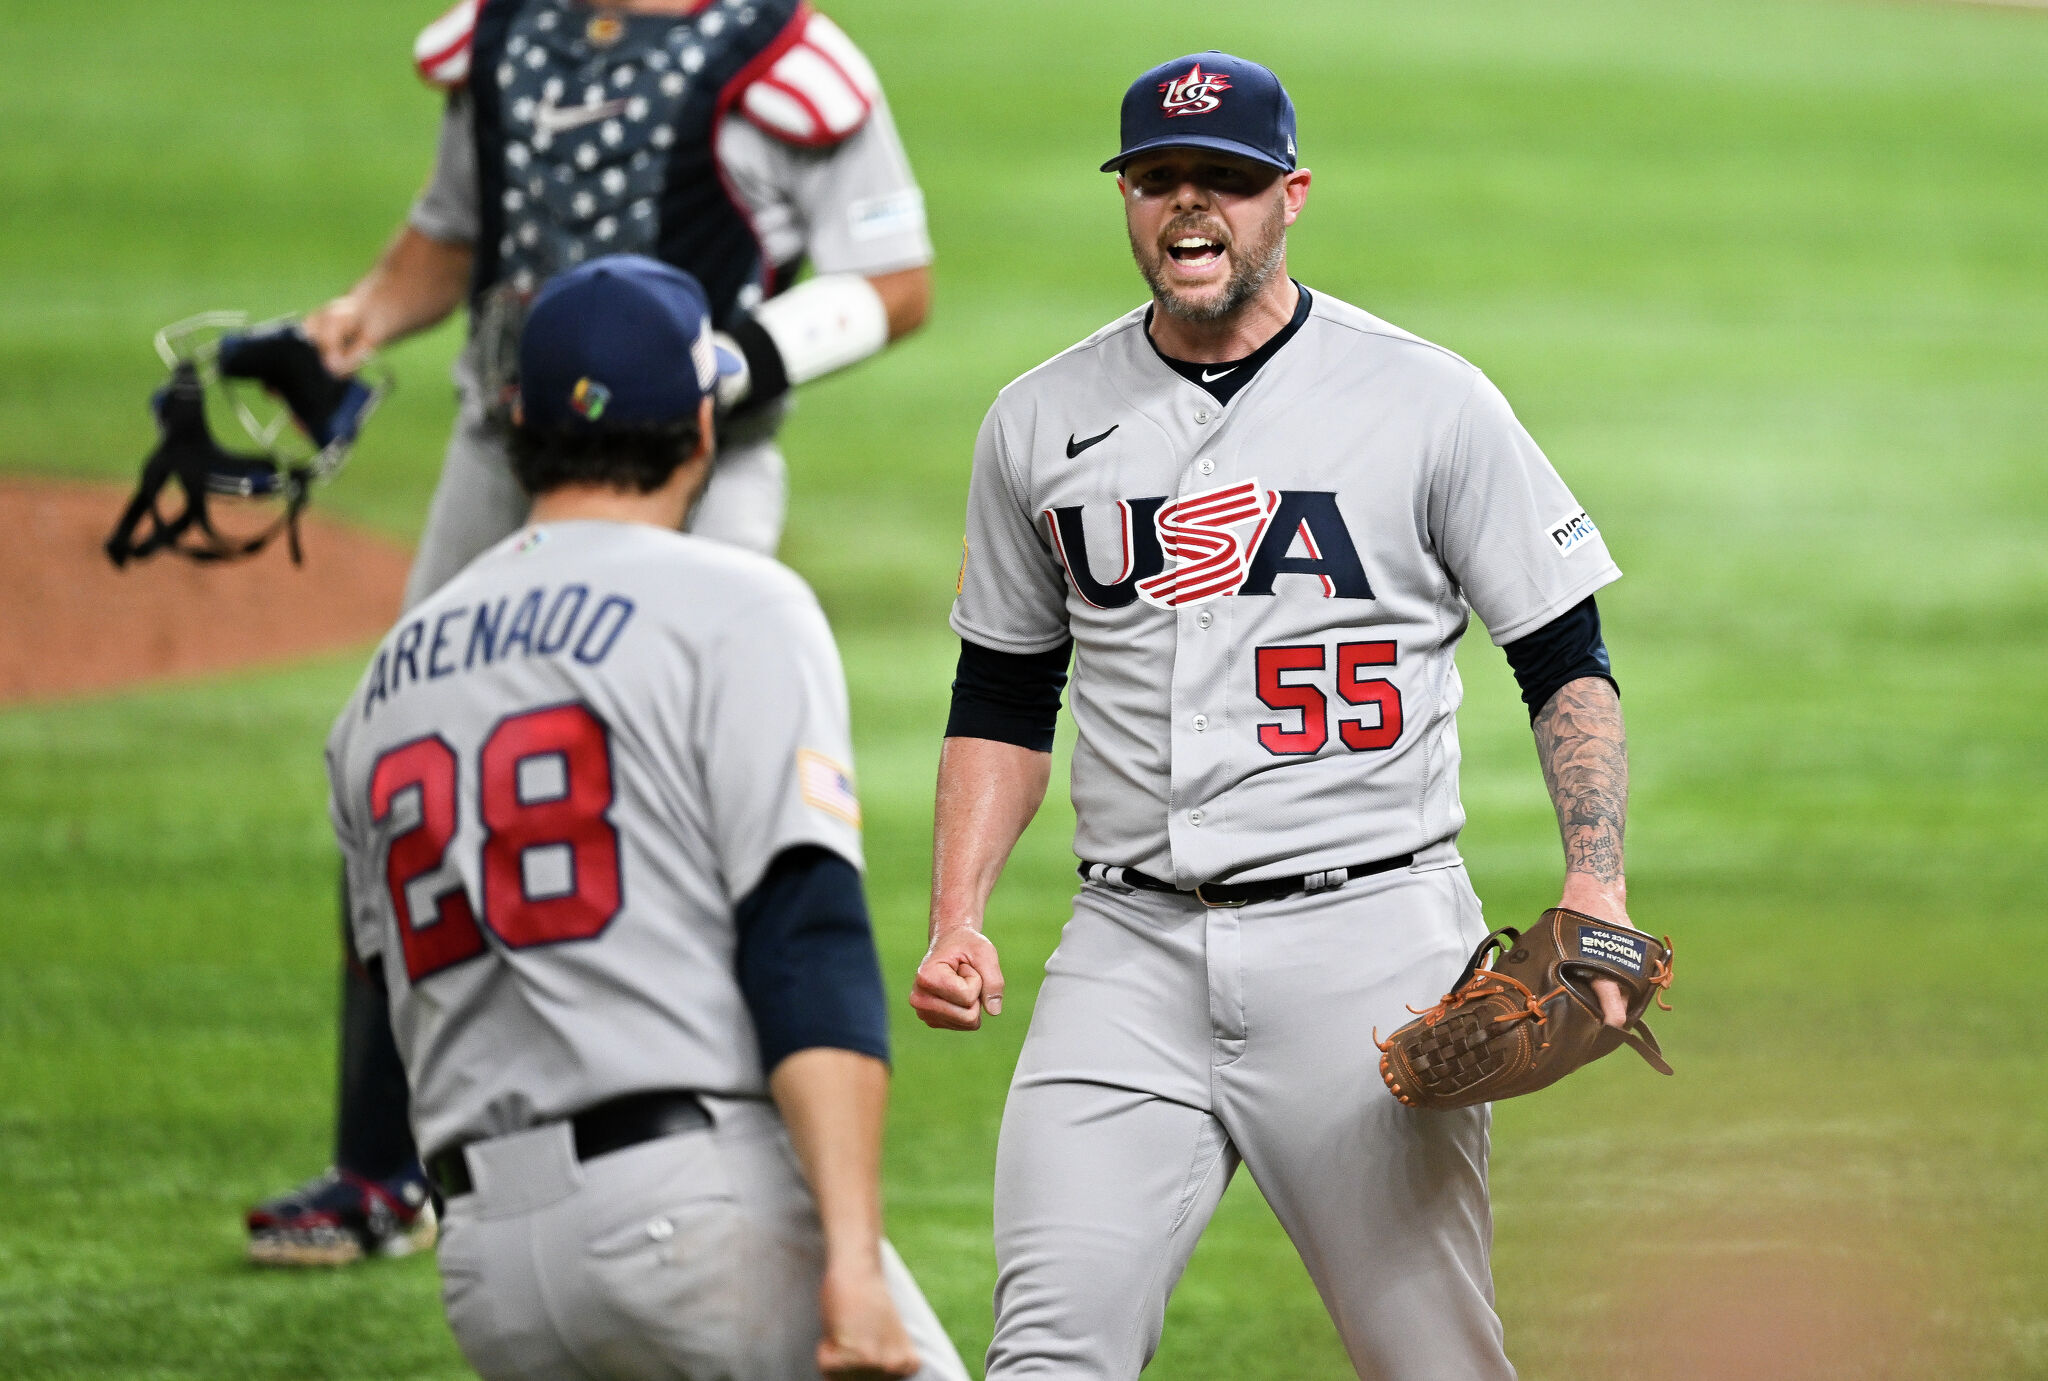 How Astros have done in the World Baseball Classic